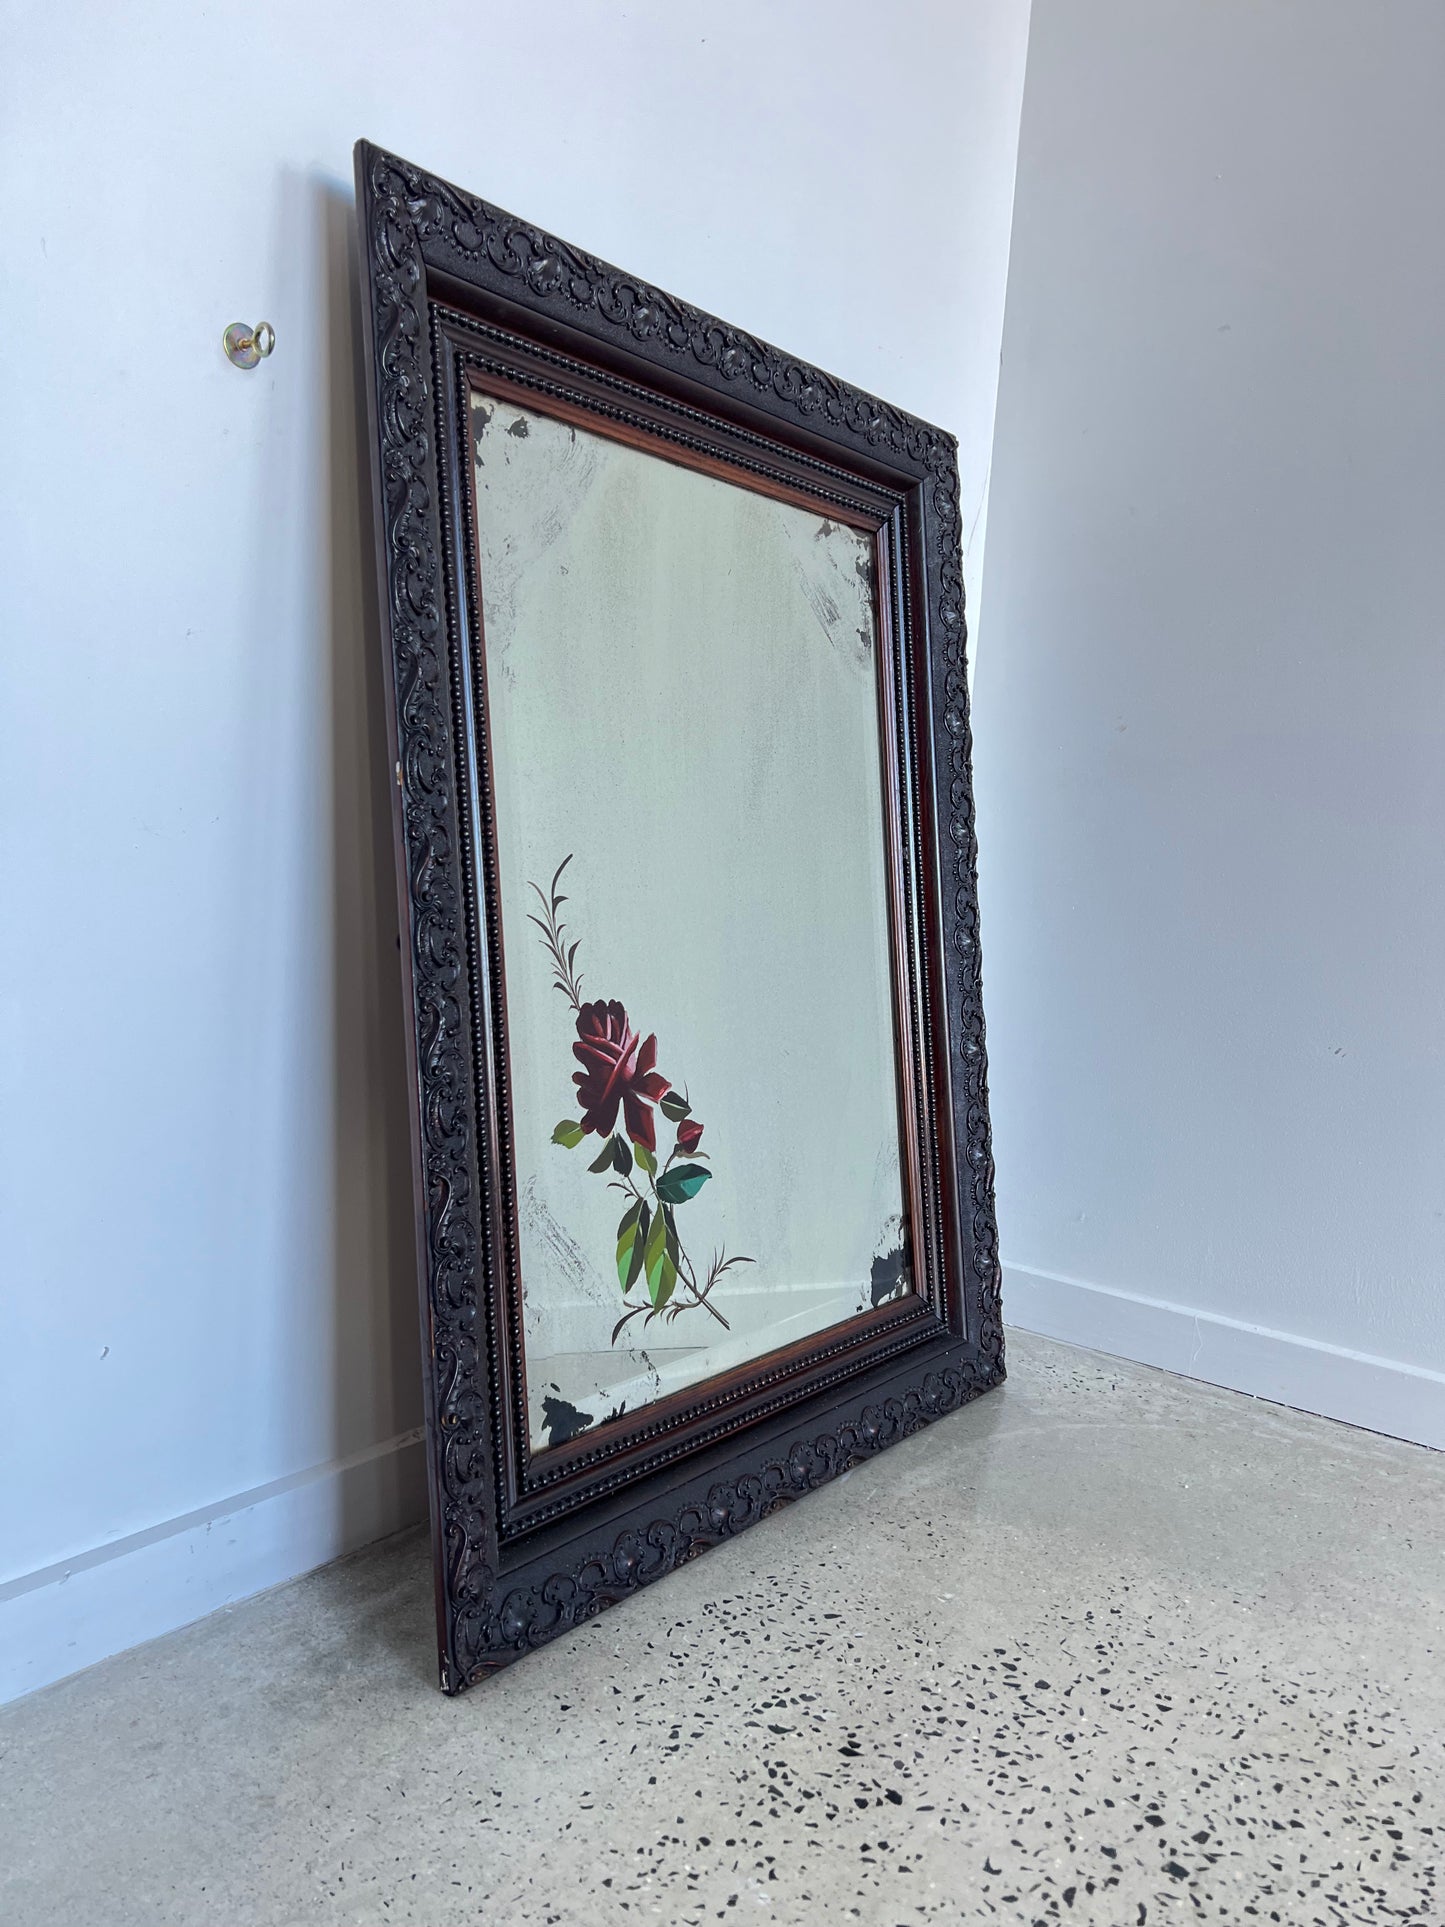 Italian Rectangular Walnut Wall Mirror with Curved Frame and Flowers art work, 1950s